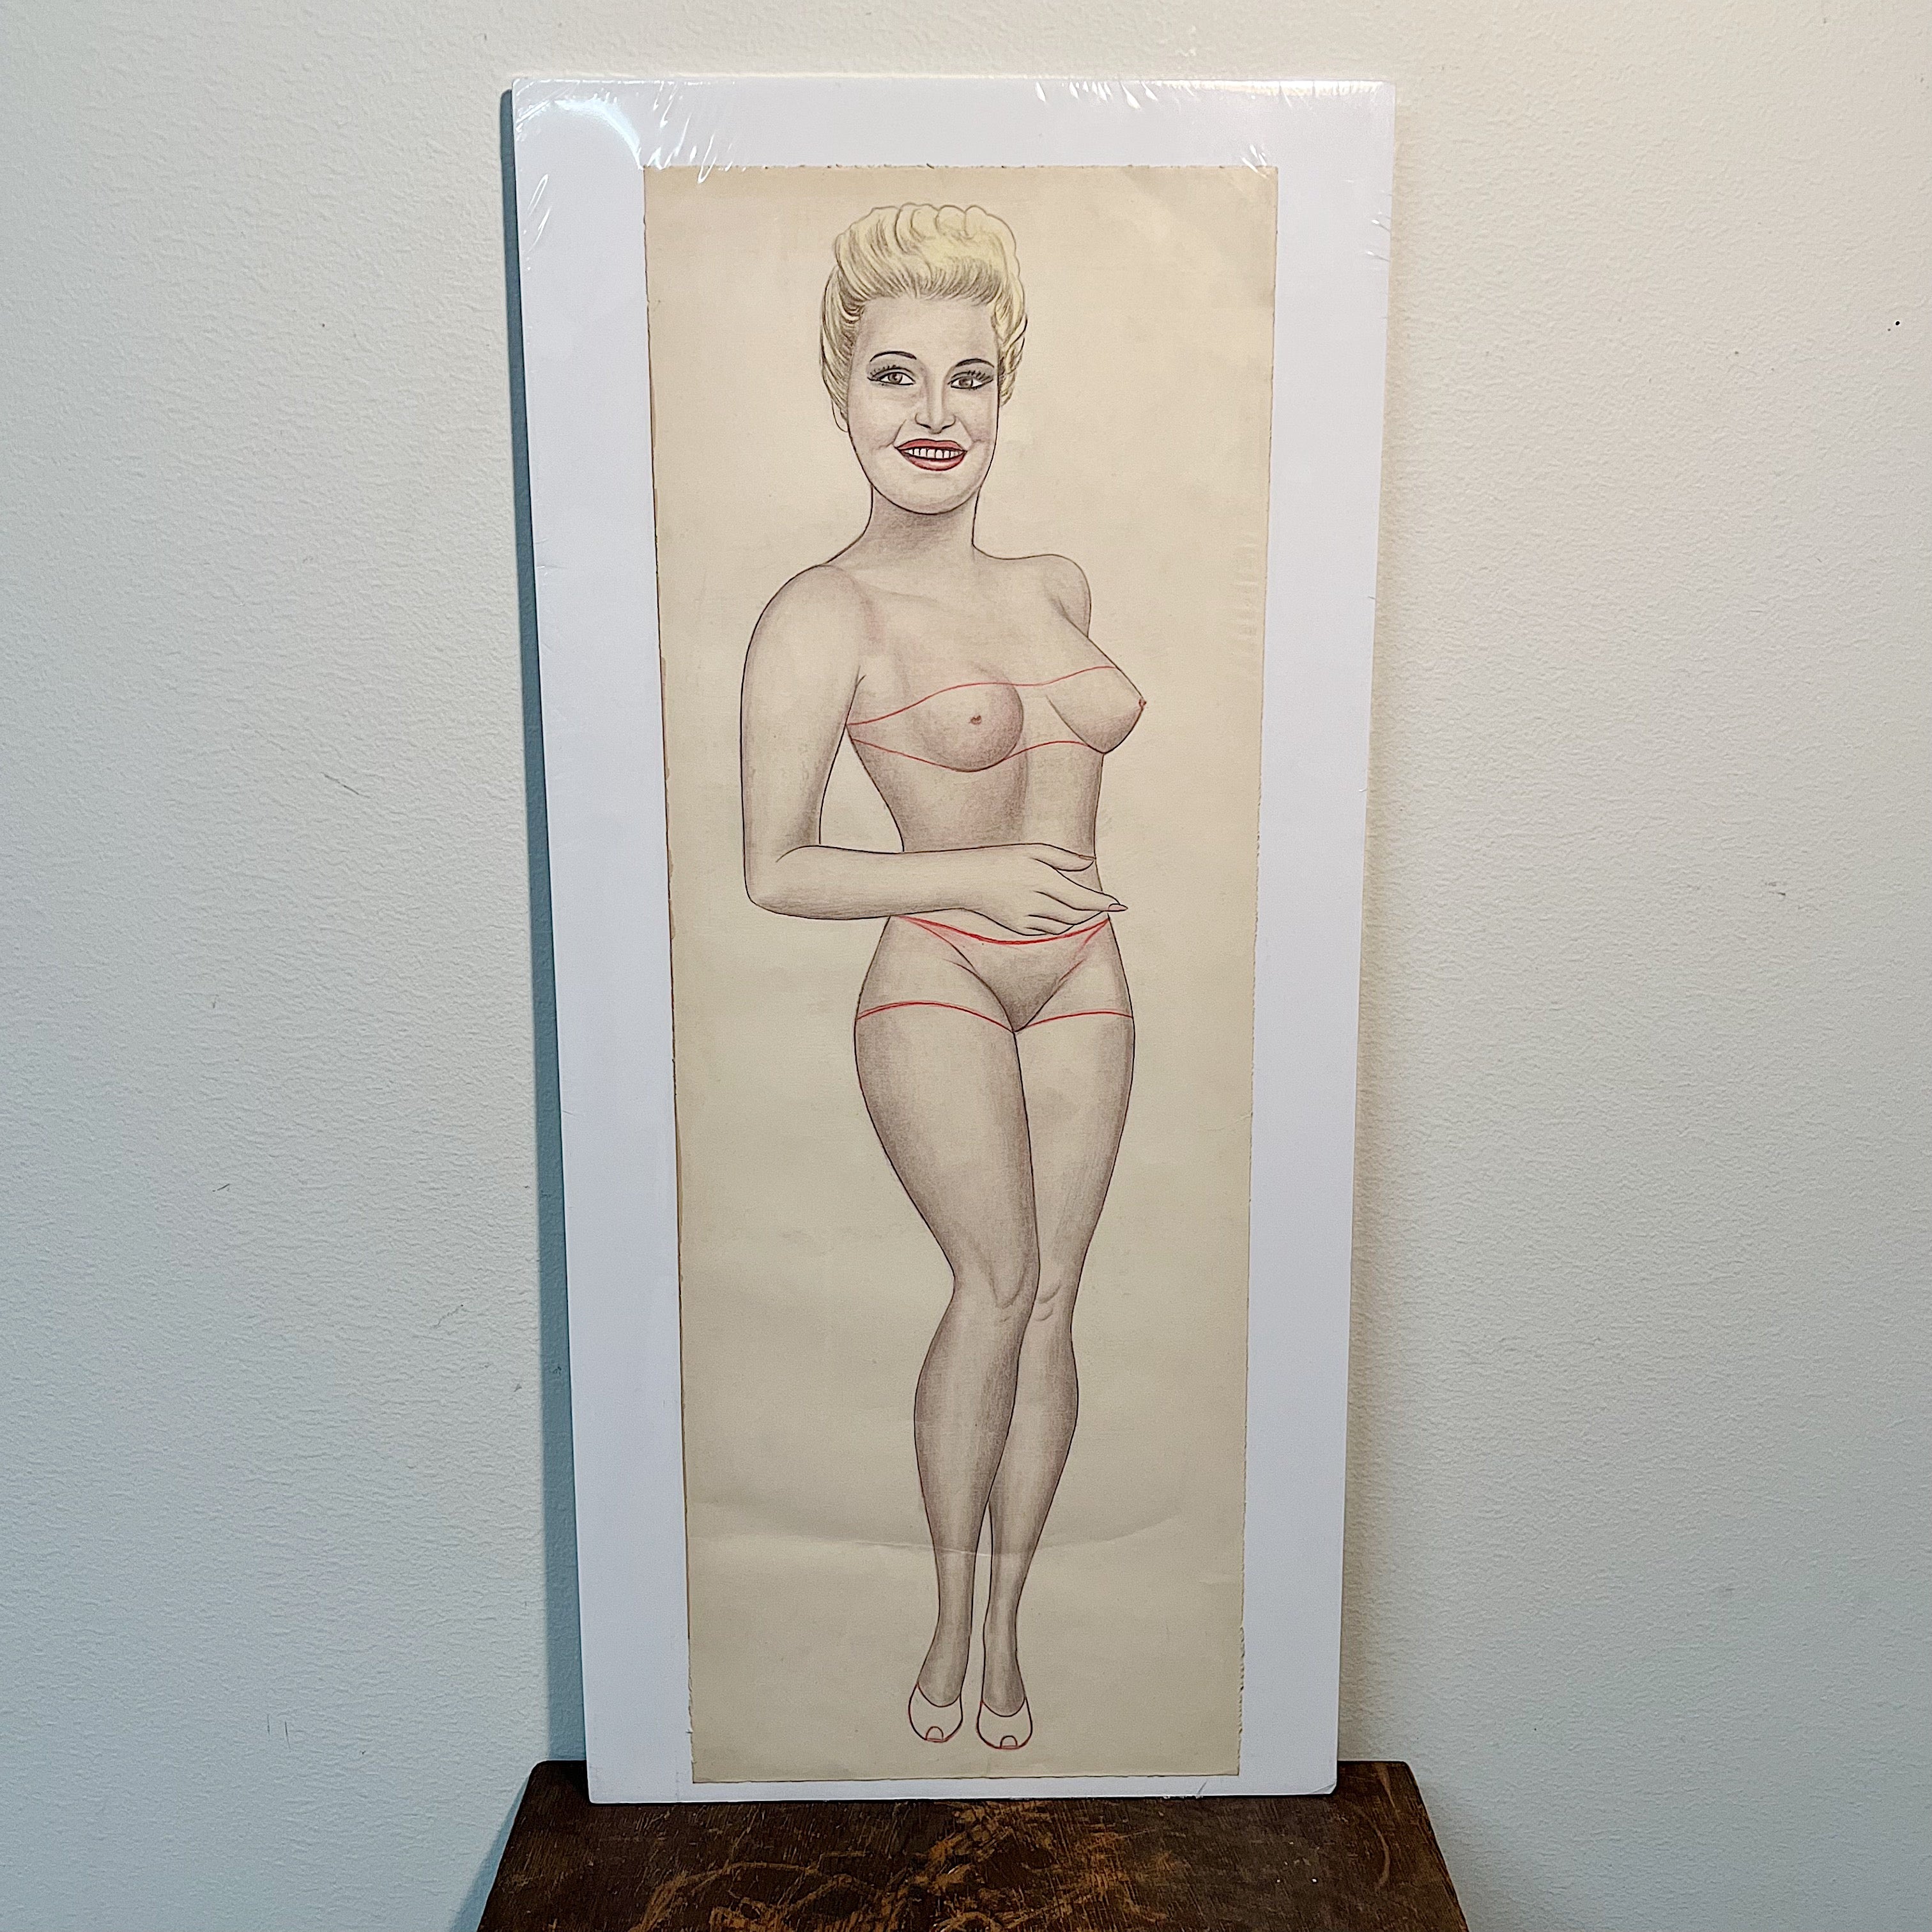 Rare 1950s Pin Up Nude Drawing of Posing Woman - Vintage Hot Rod Rockabilly Culture - Colored Pencil Female Drawings - Man Cave Artwork